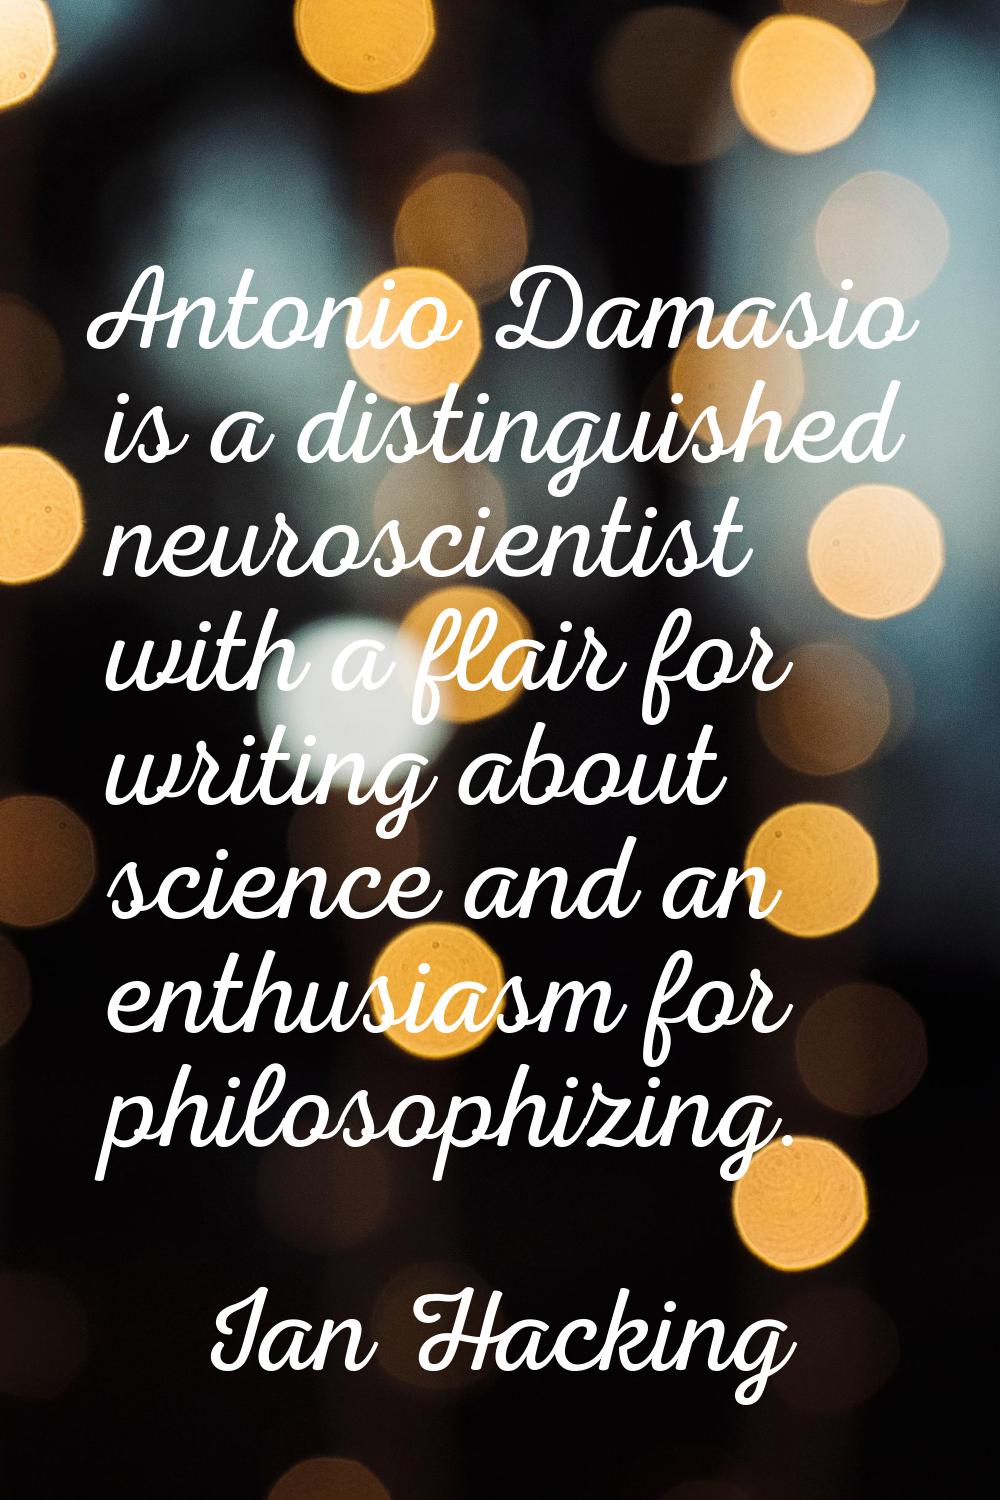 Antonio Damasio is a distinguished neuroscientist with a flair for writing about science and an ent